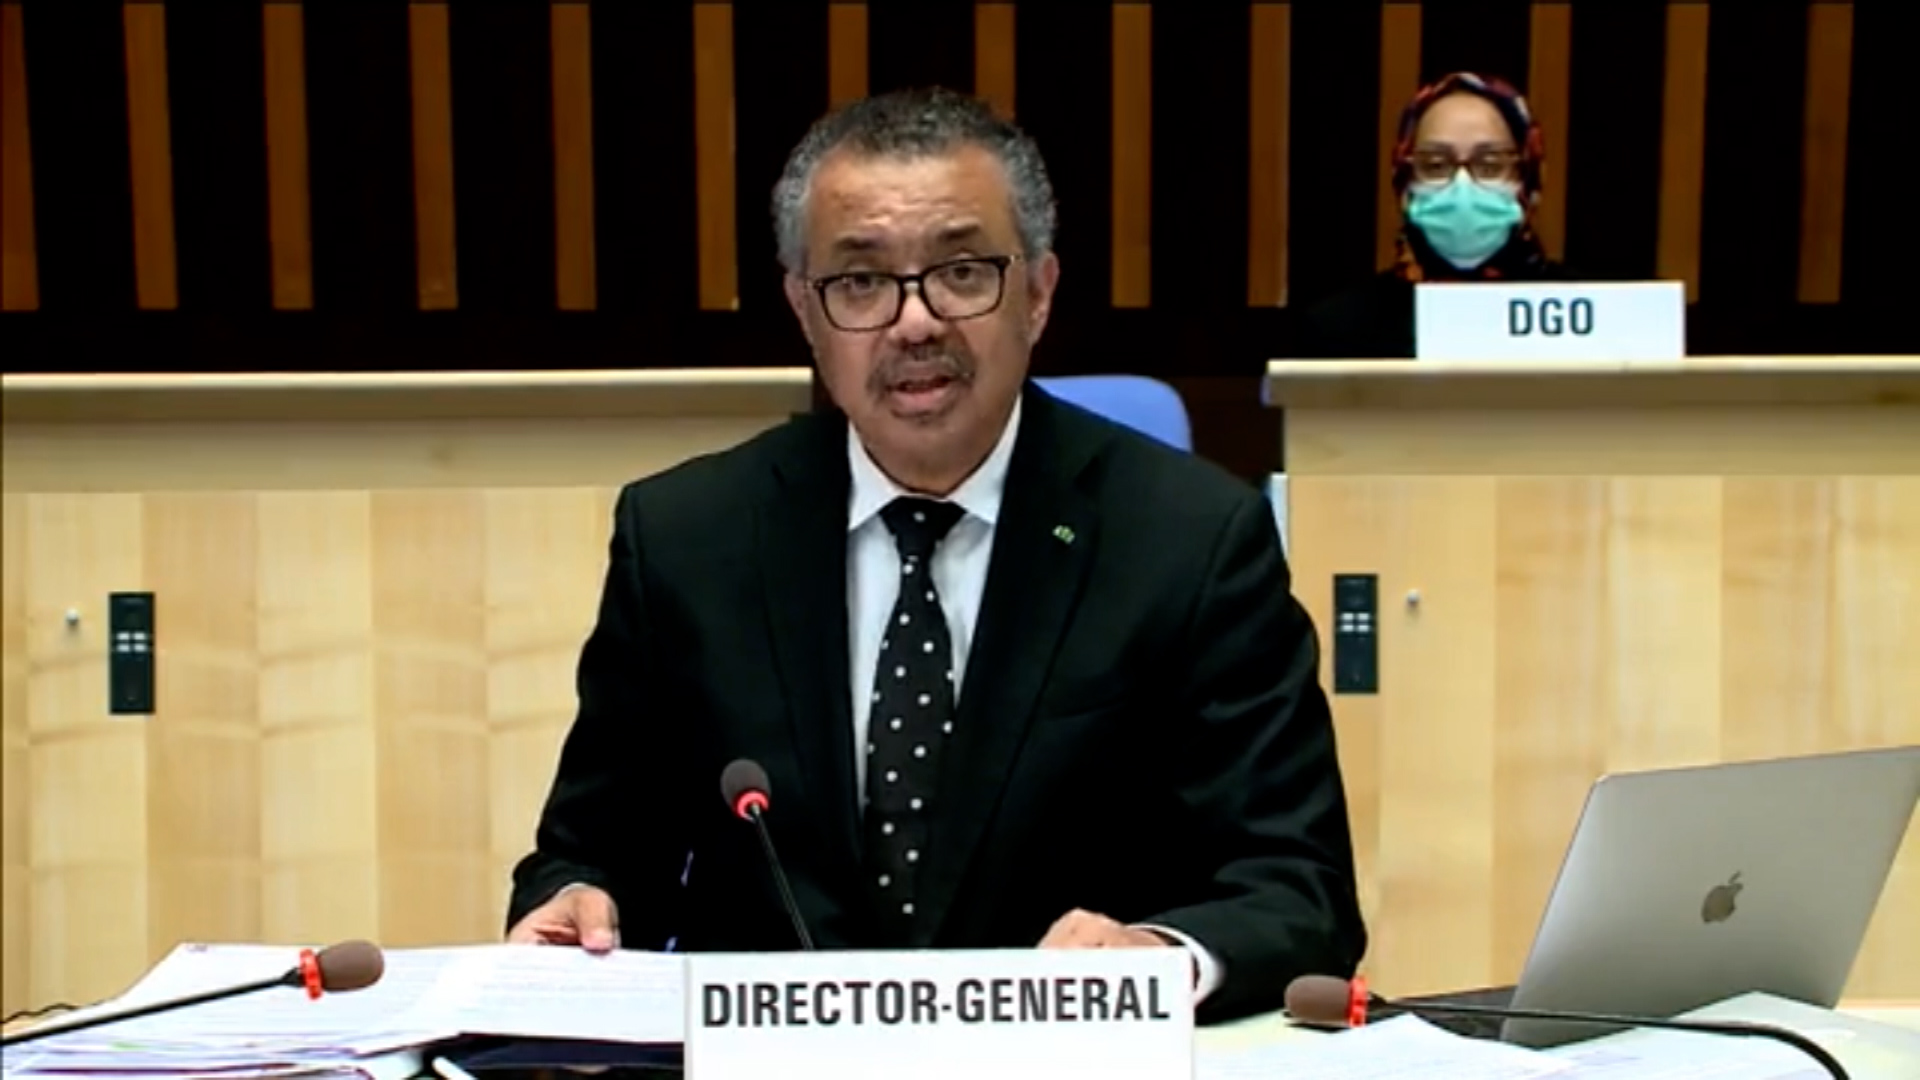 World Health Organization Director-General Tedros Adhanom Ghebreyesus speaks during the closing of the 74th World Health Assembly on May 31.